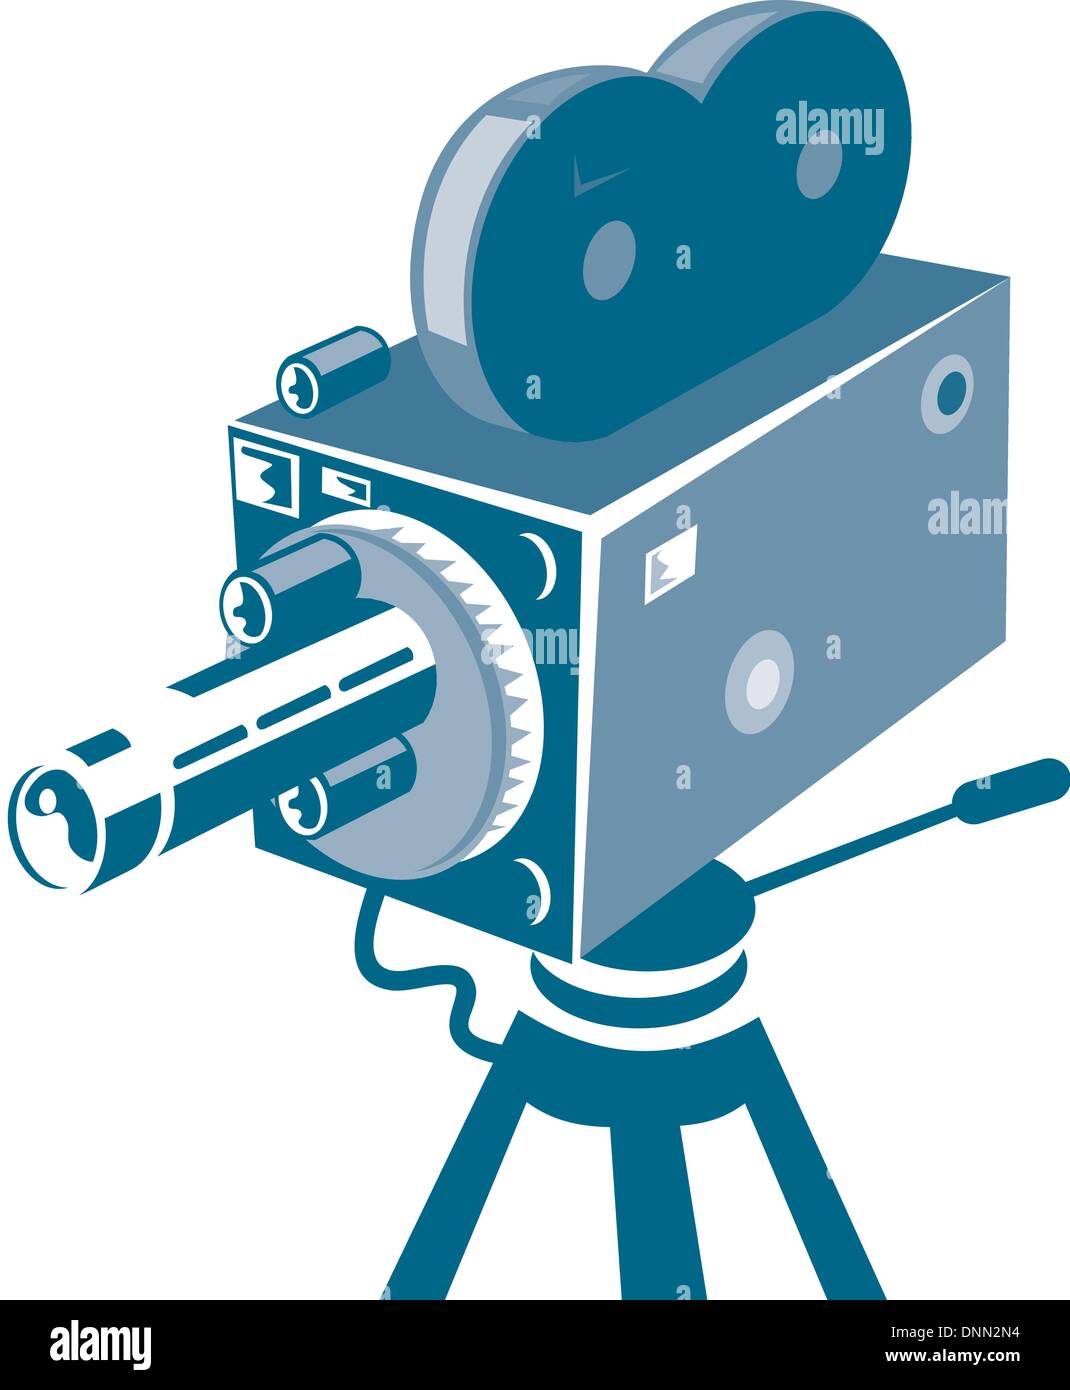 Illustration of a vintage video camera done in retro style. Stock Vector